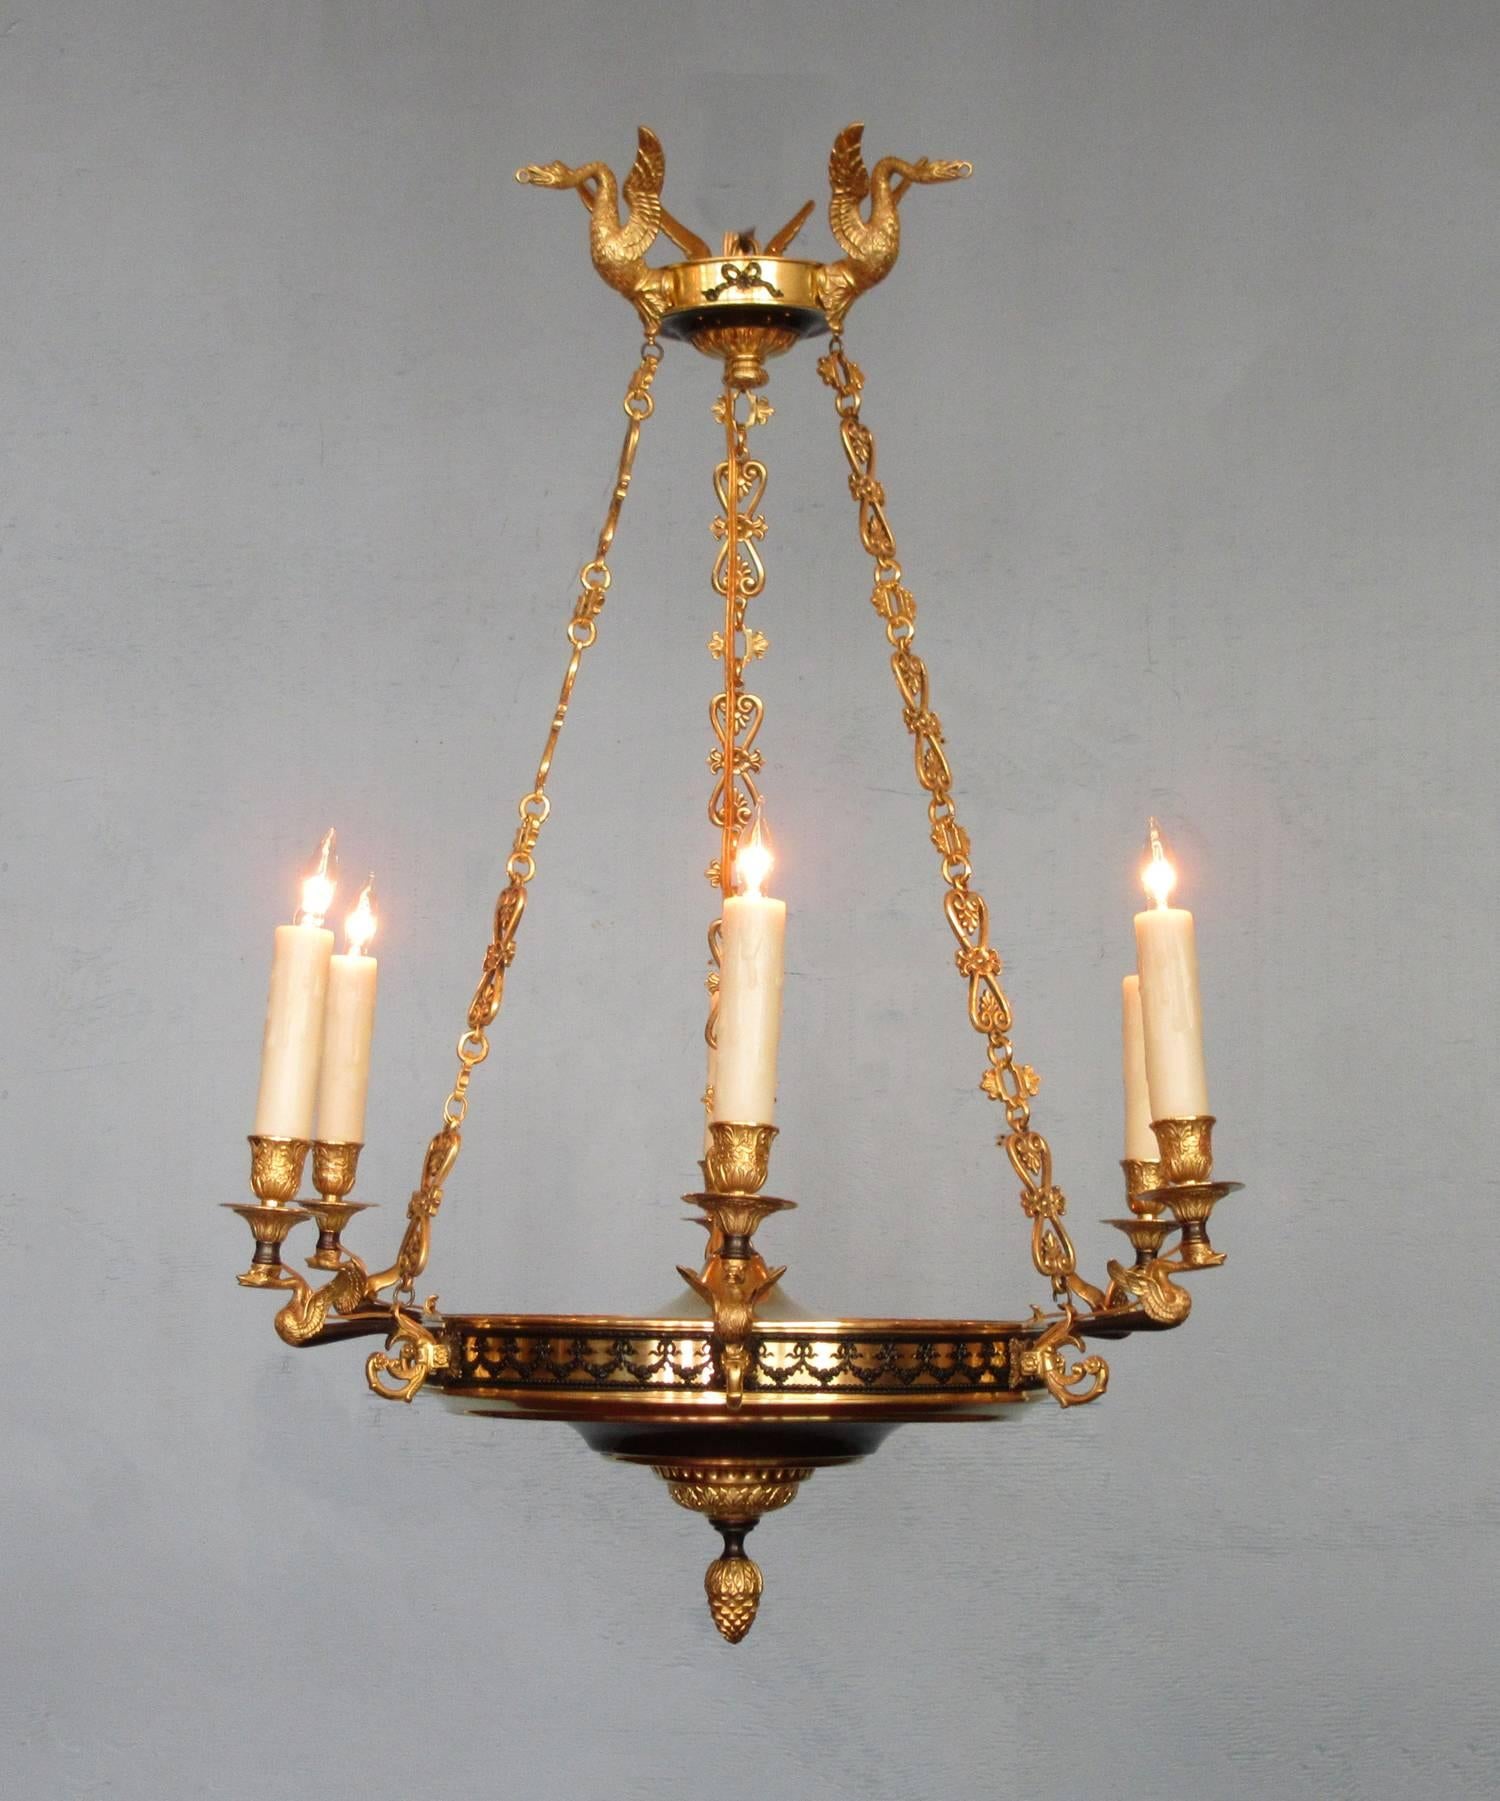 An early 19th century French restoration chandelier, circa 1820, featuring six candle arms, patinated and gilded bronze body adorned with finely detailed displayed swans. The chandelier was originally candle but has recently been cleaned and rewired